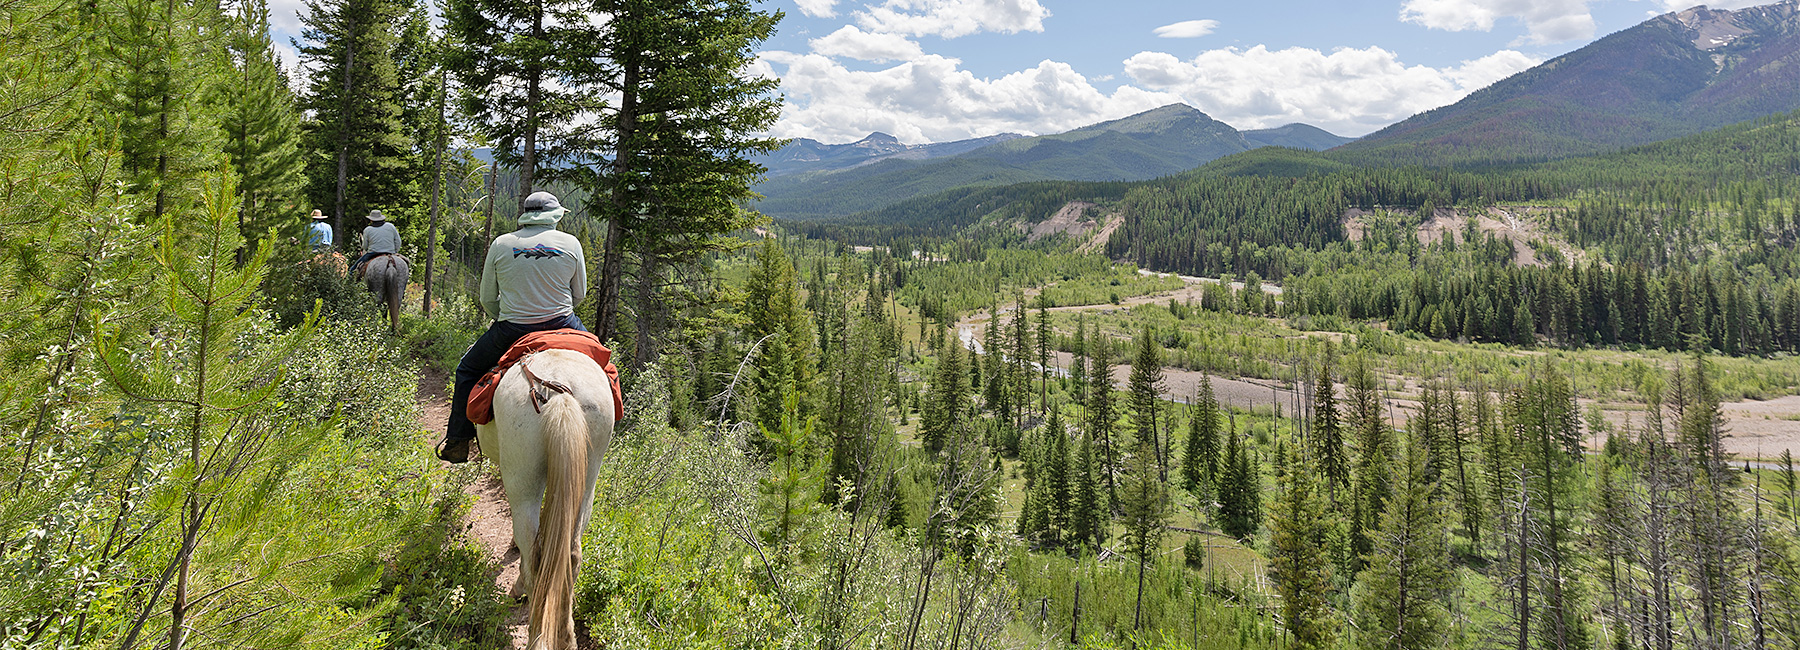 15 Best Things To Do in Red Lodge, Montana in 2023 - Goats On The Road